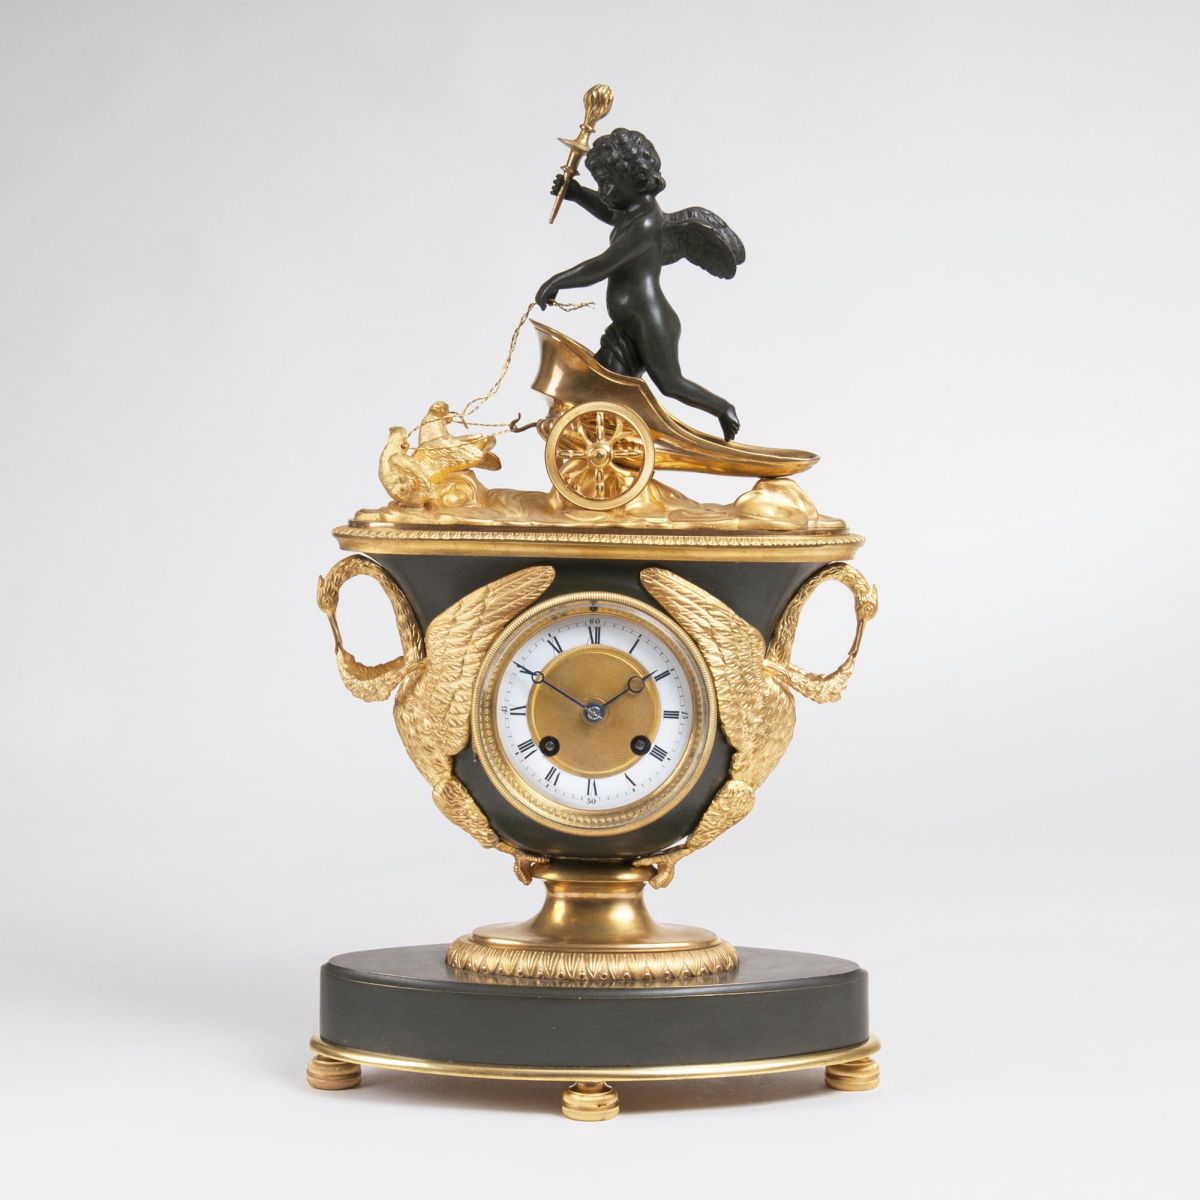 A fine French Empire Pendulum with Amor as Allegory of Love